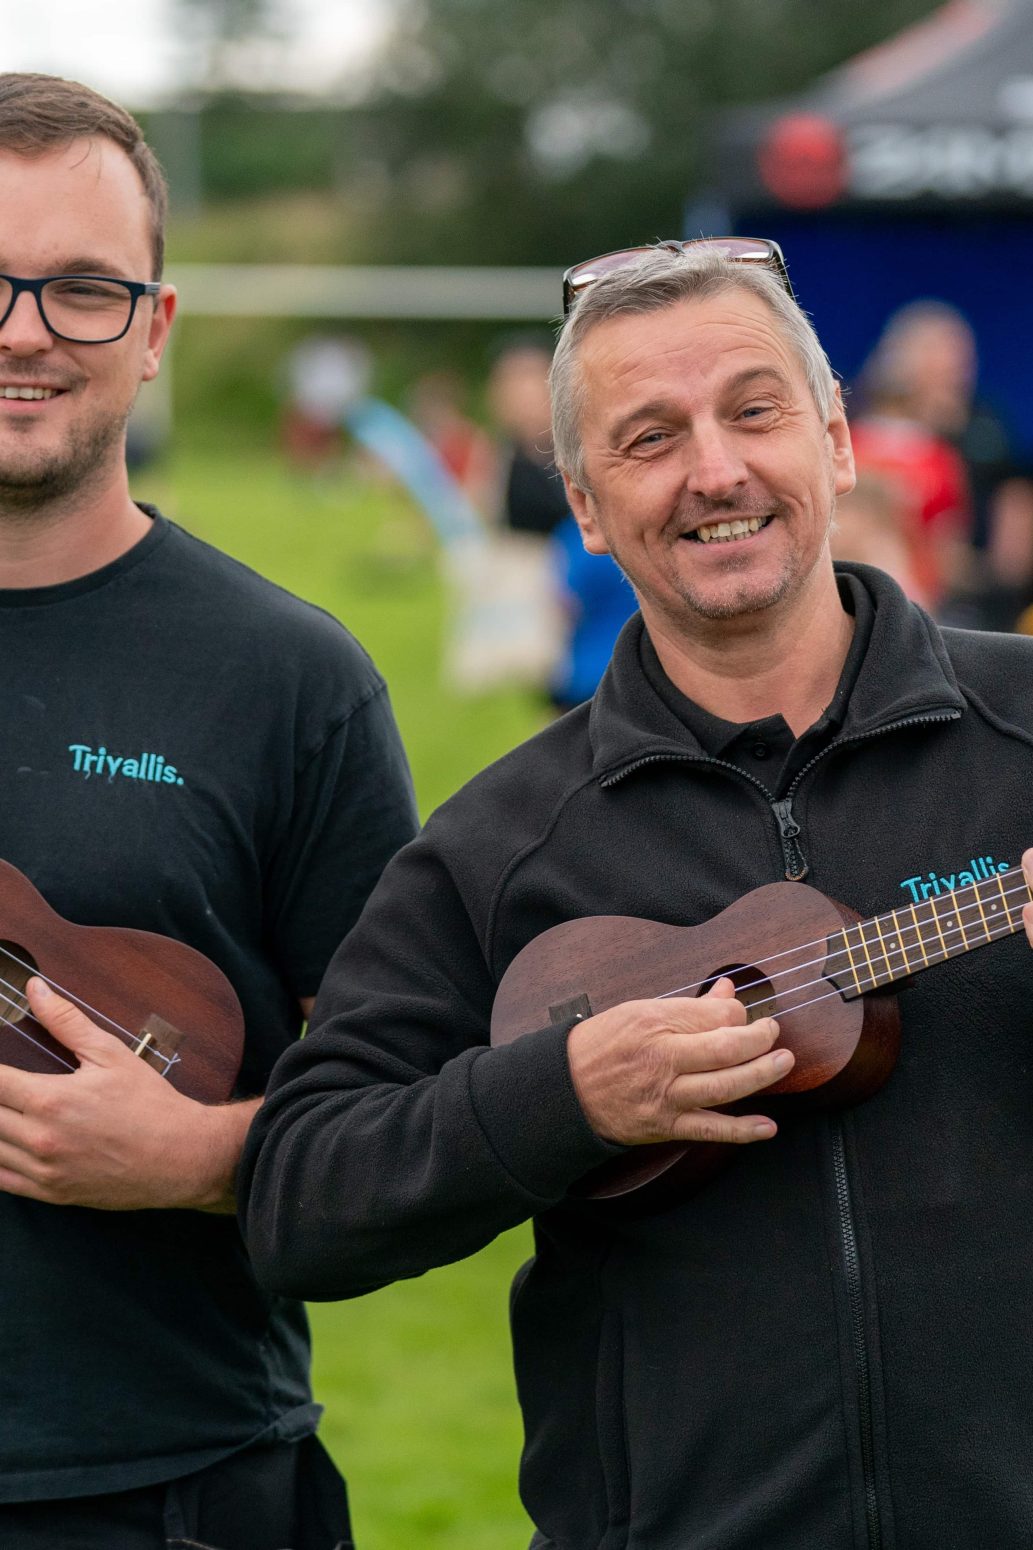 Trivallis Housing Landlord Wales Two men holding ukuleles and smiling at a Trivallis outdoor event.